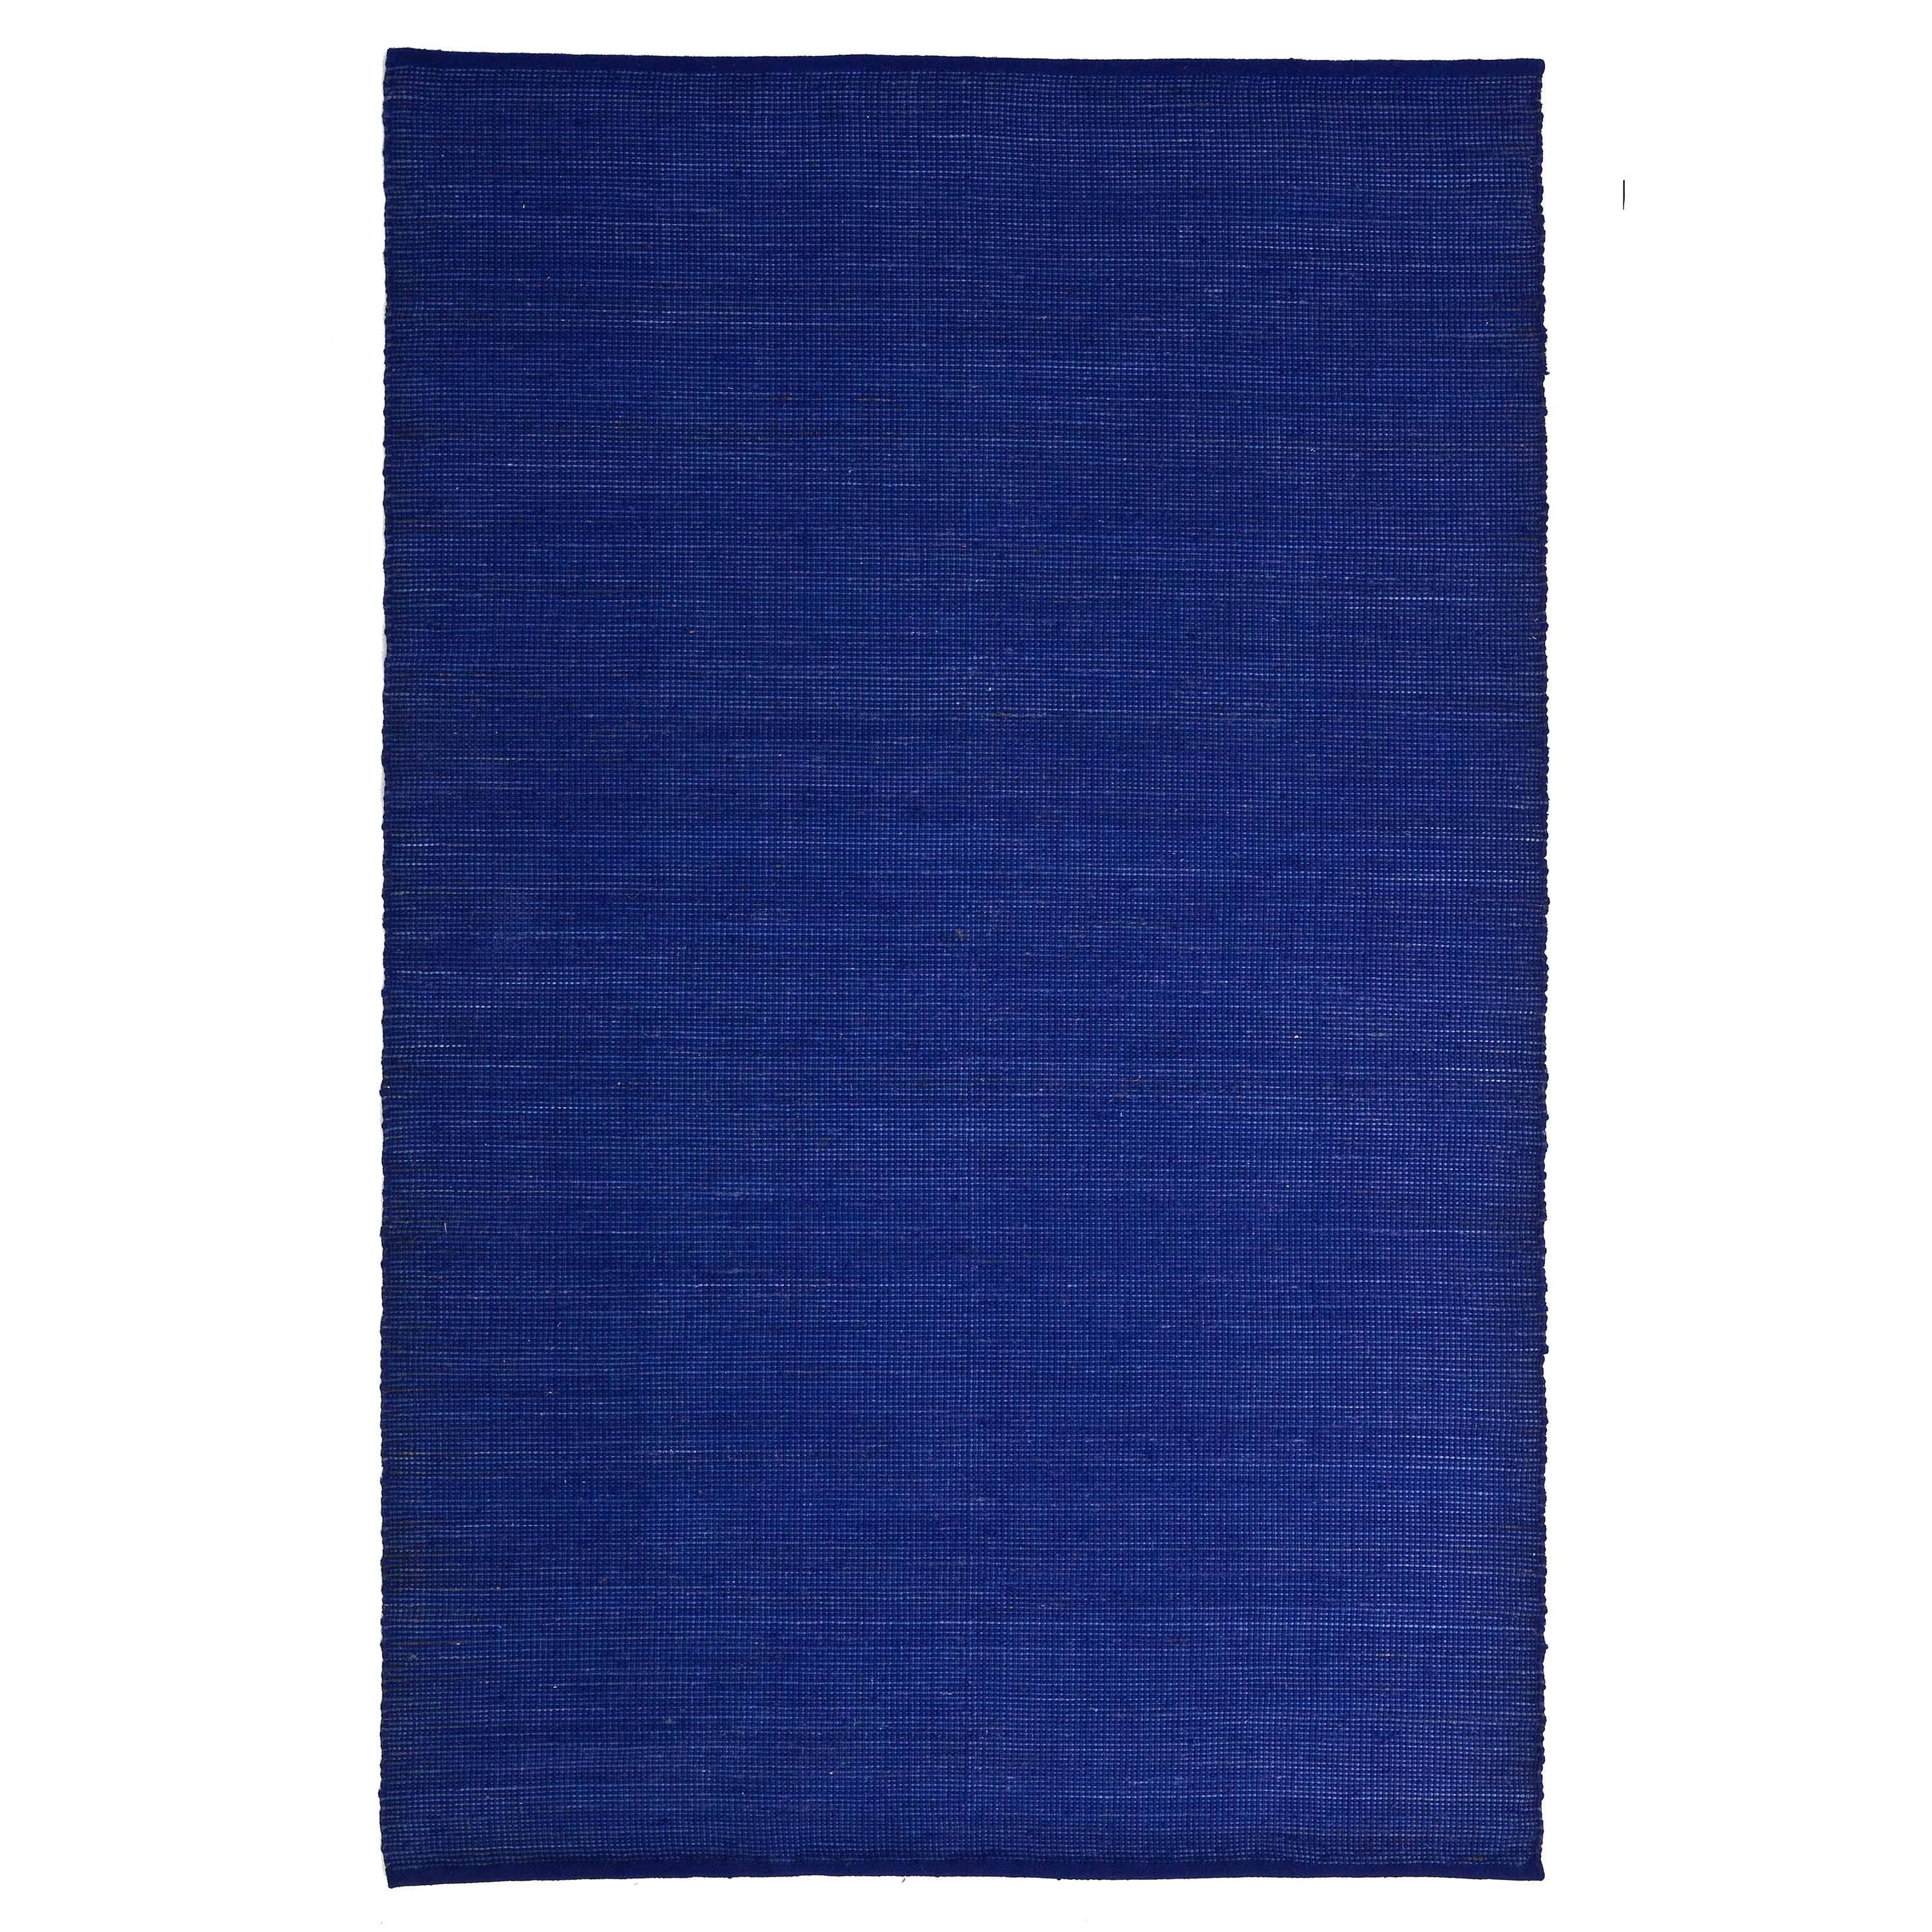 Large 'Tatami' Rug by Ariadna Miquel and Nani Marquina for Nanimarquina For Sale 5